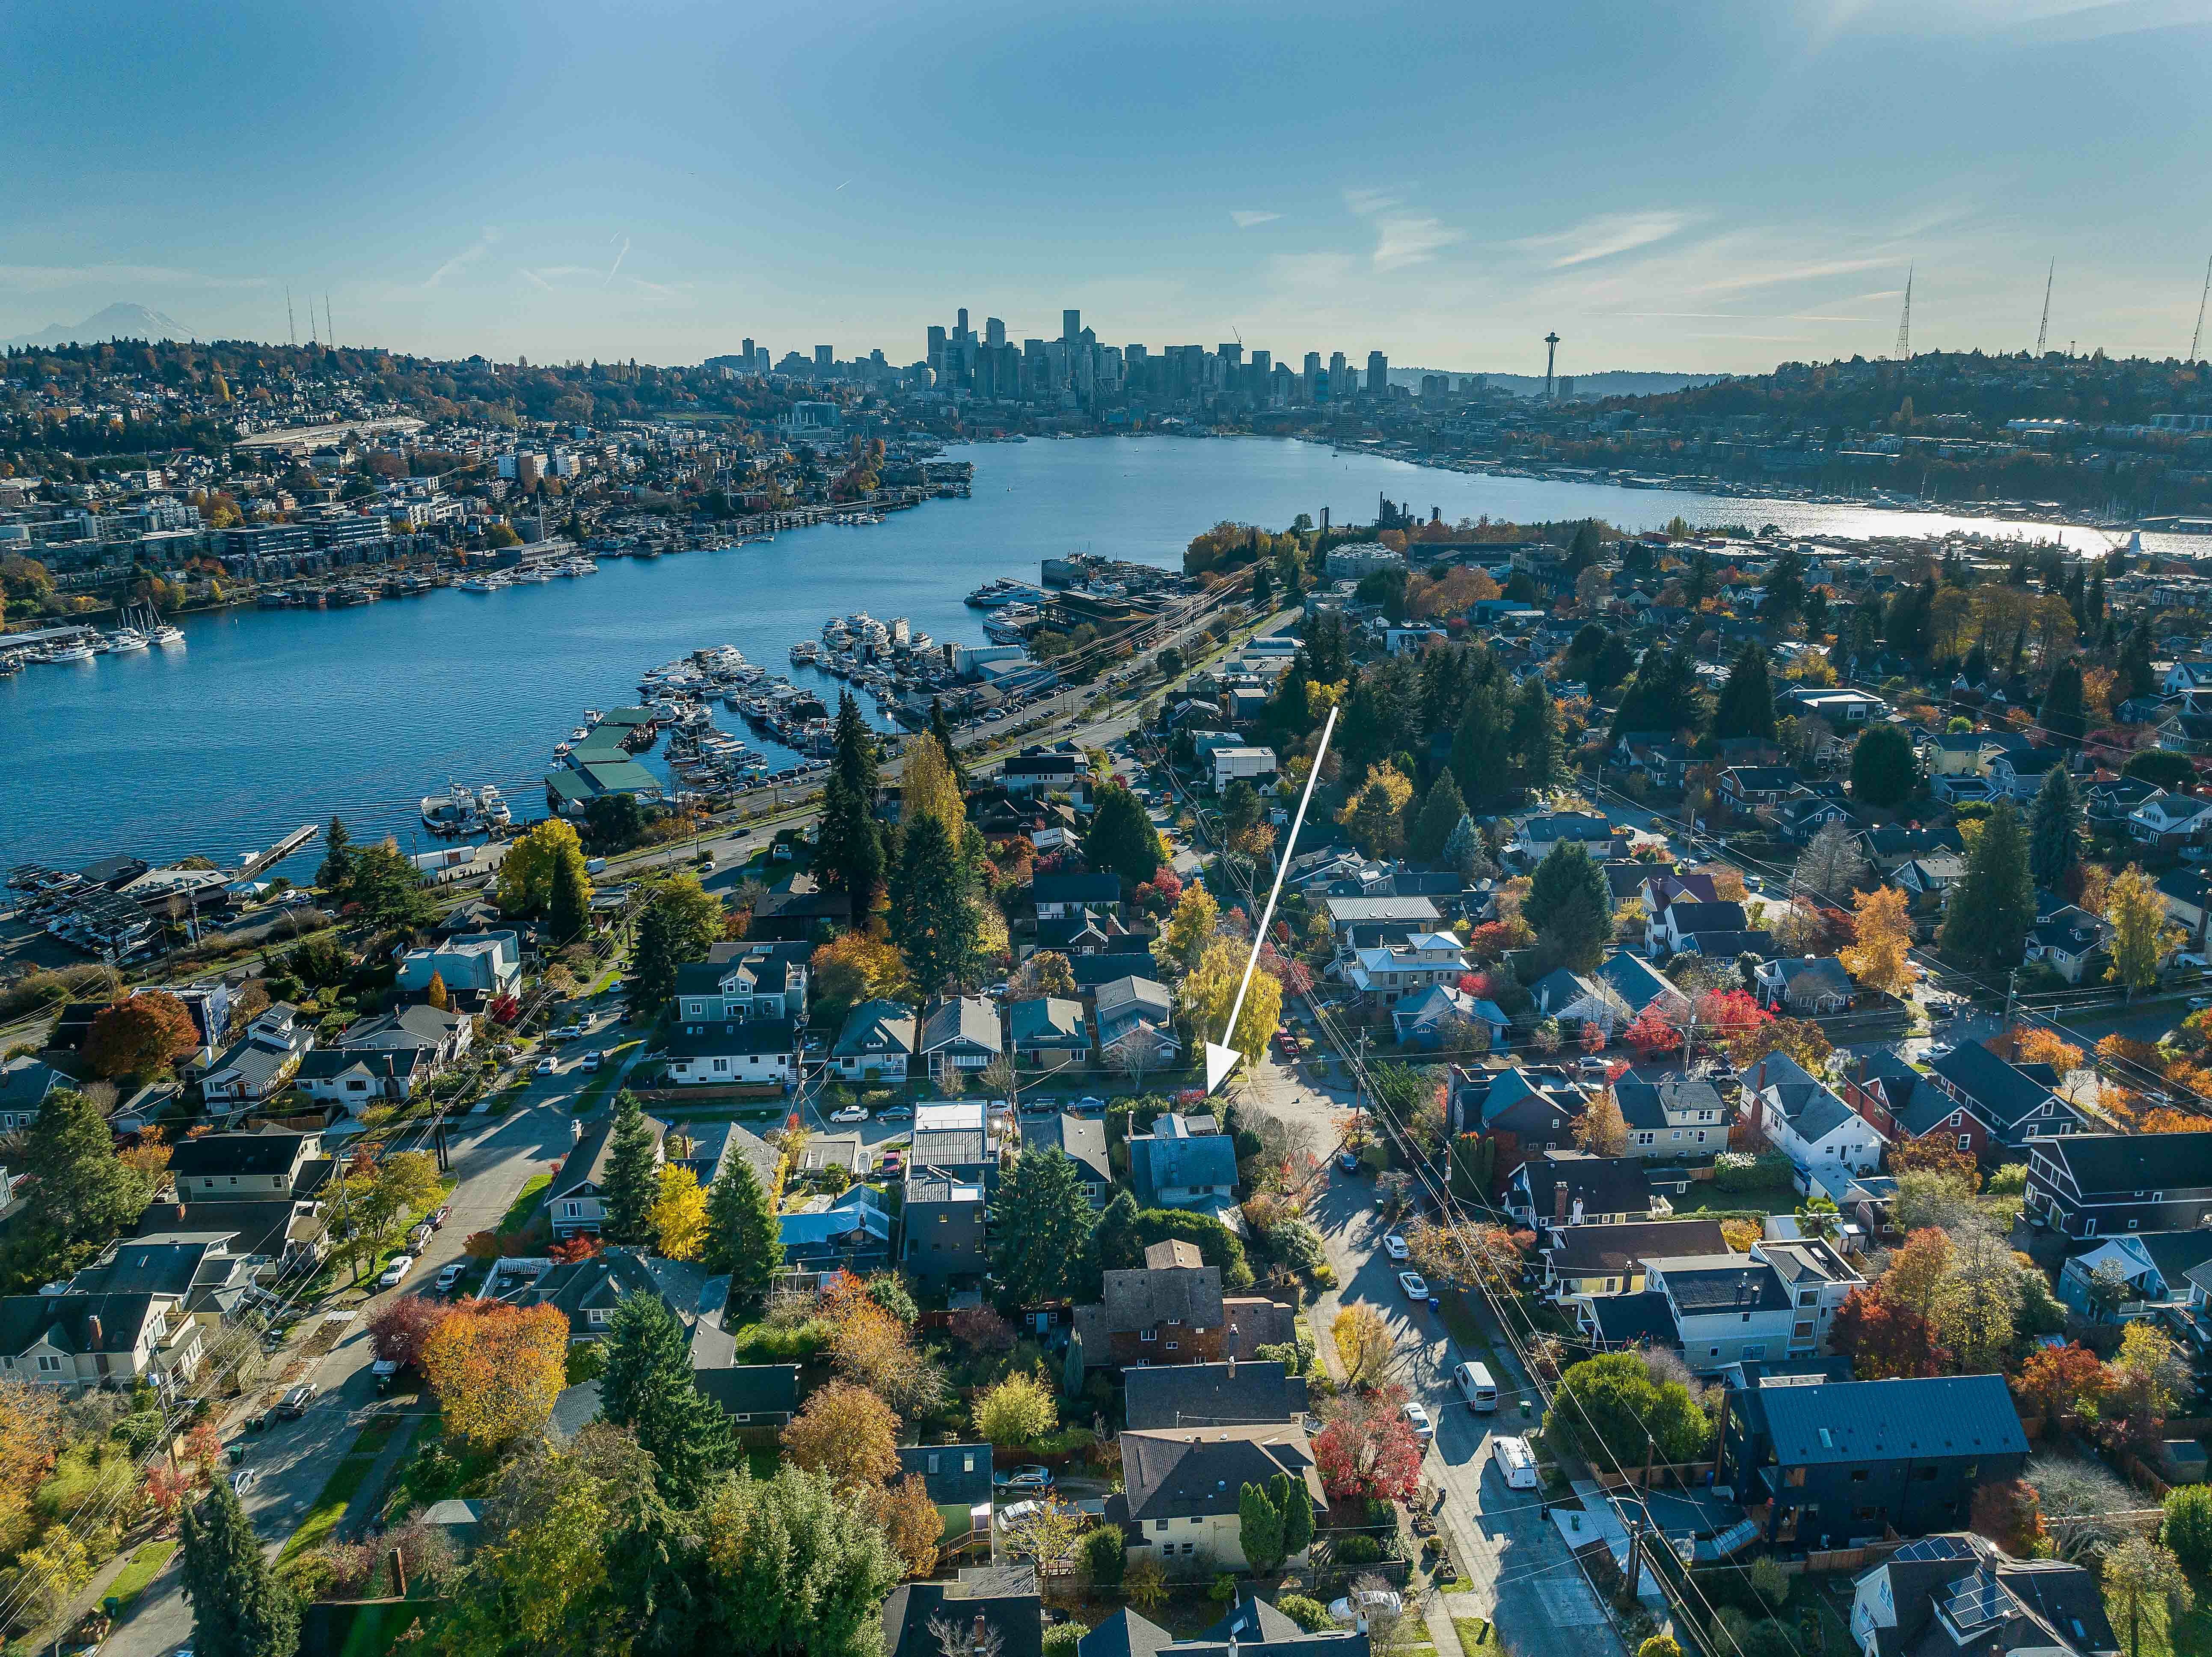 2300 N 38th Street  Seattle WA 98103 photo Location (drone view) Location (drone view)